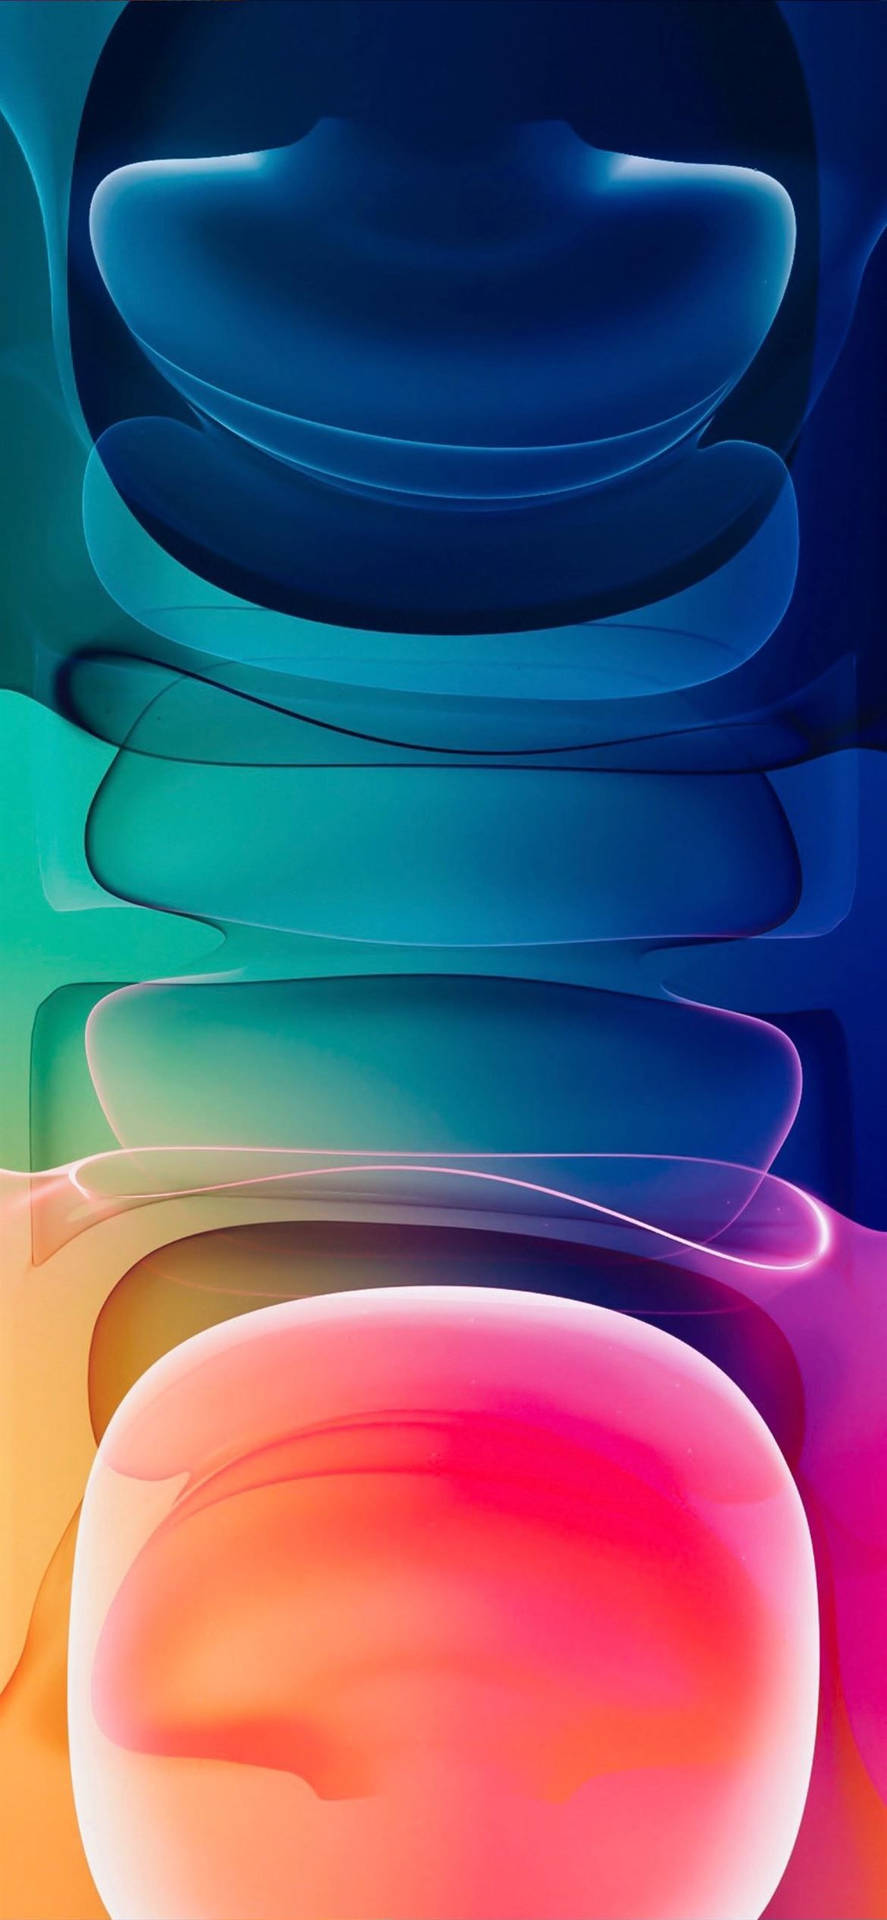 Colorful Abstract Patterns Iphone 2021 Wallpaper